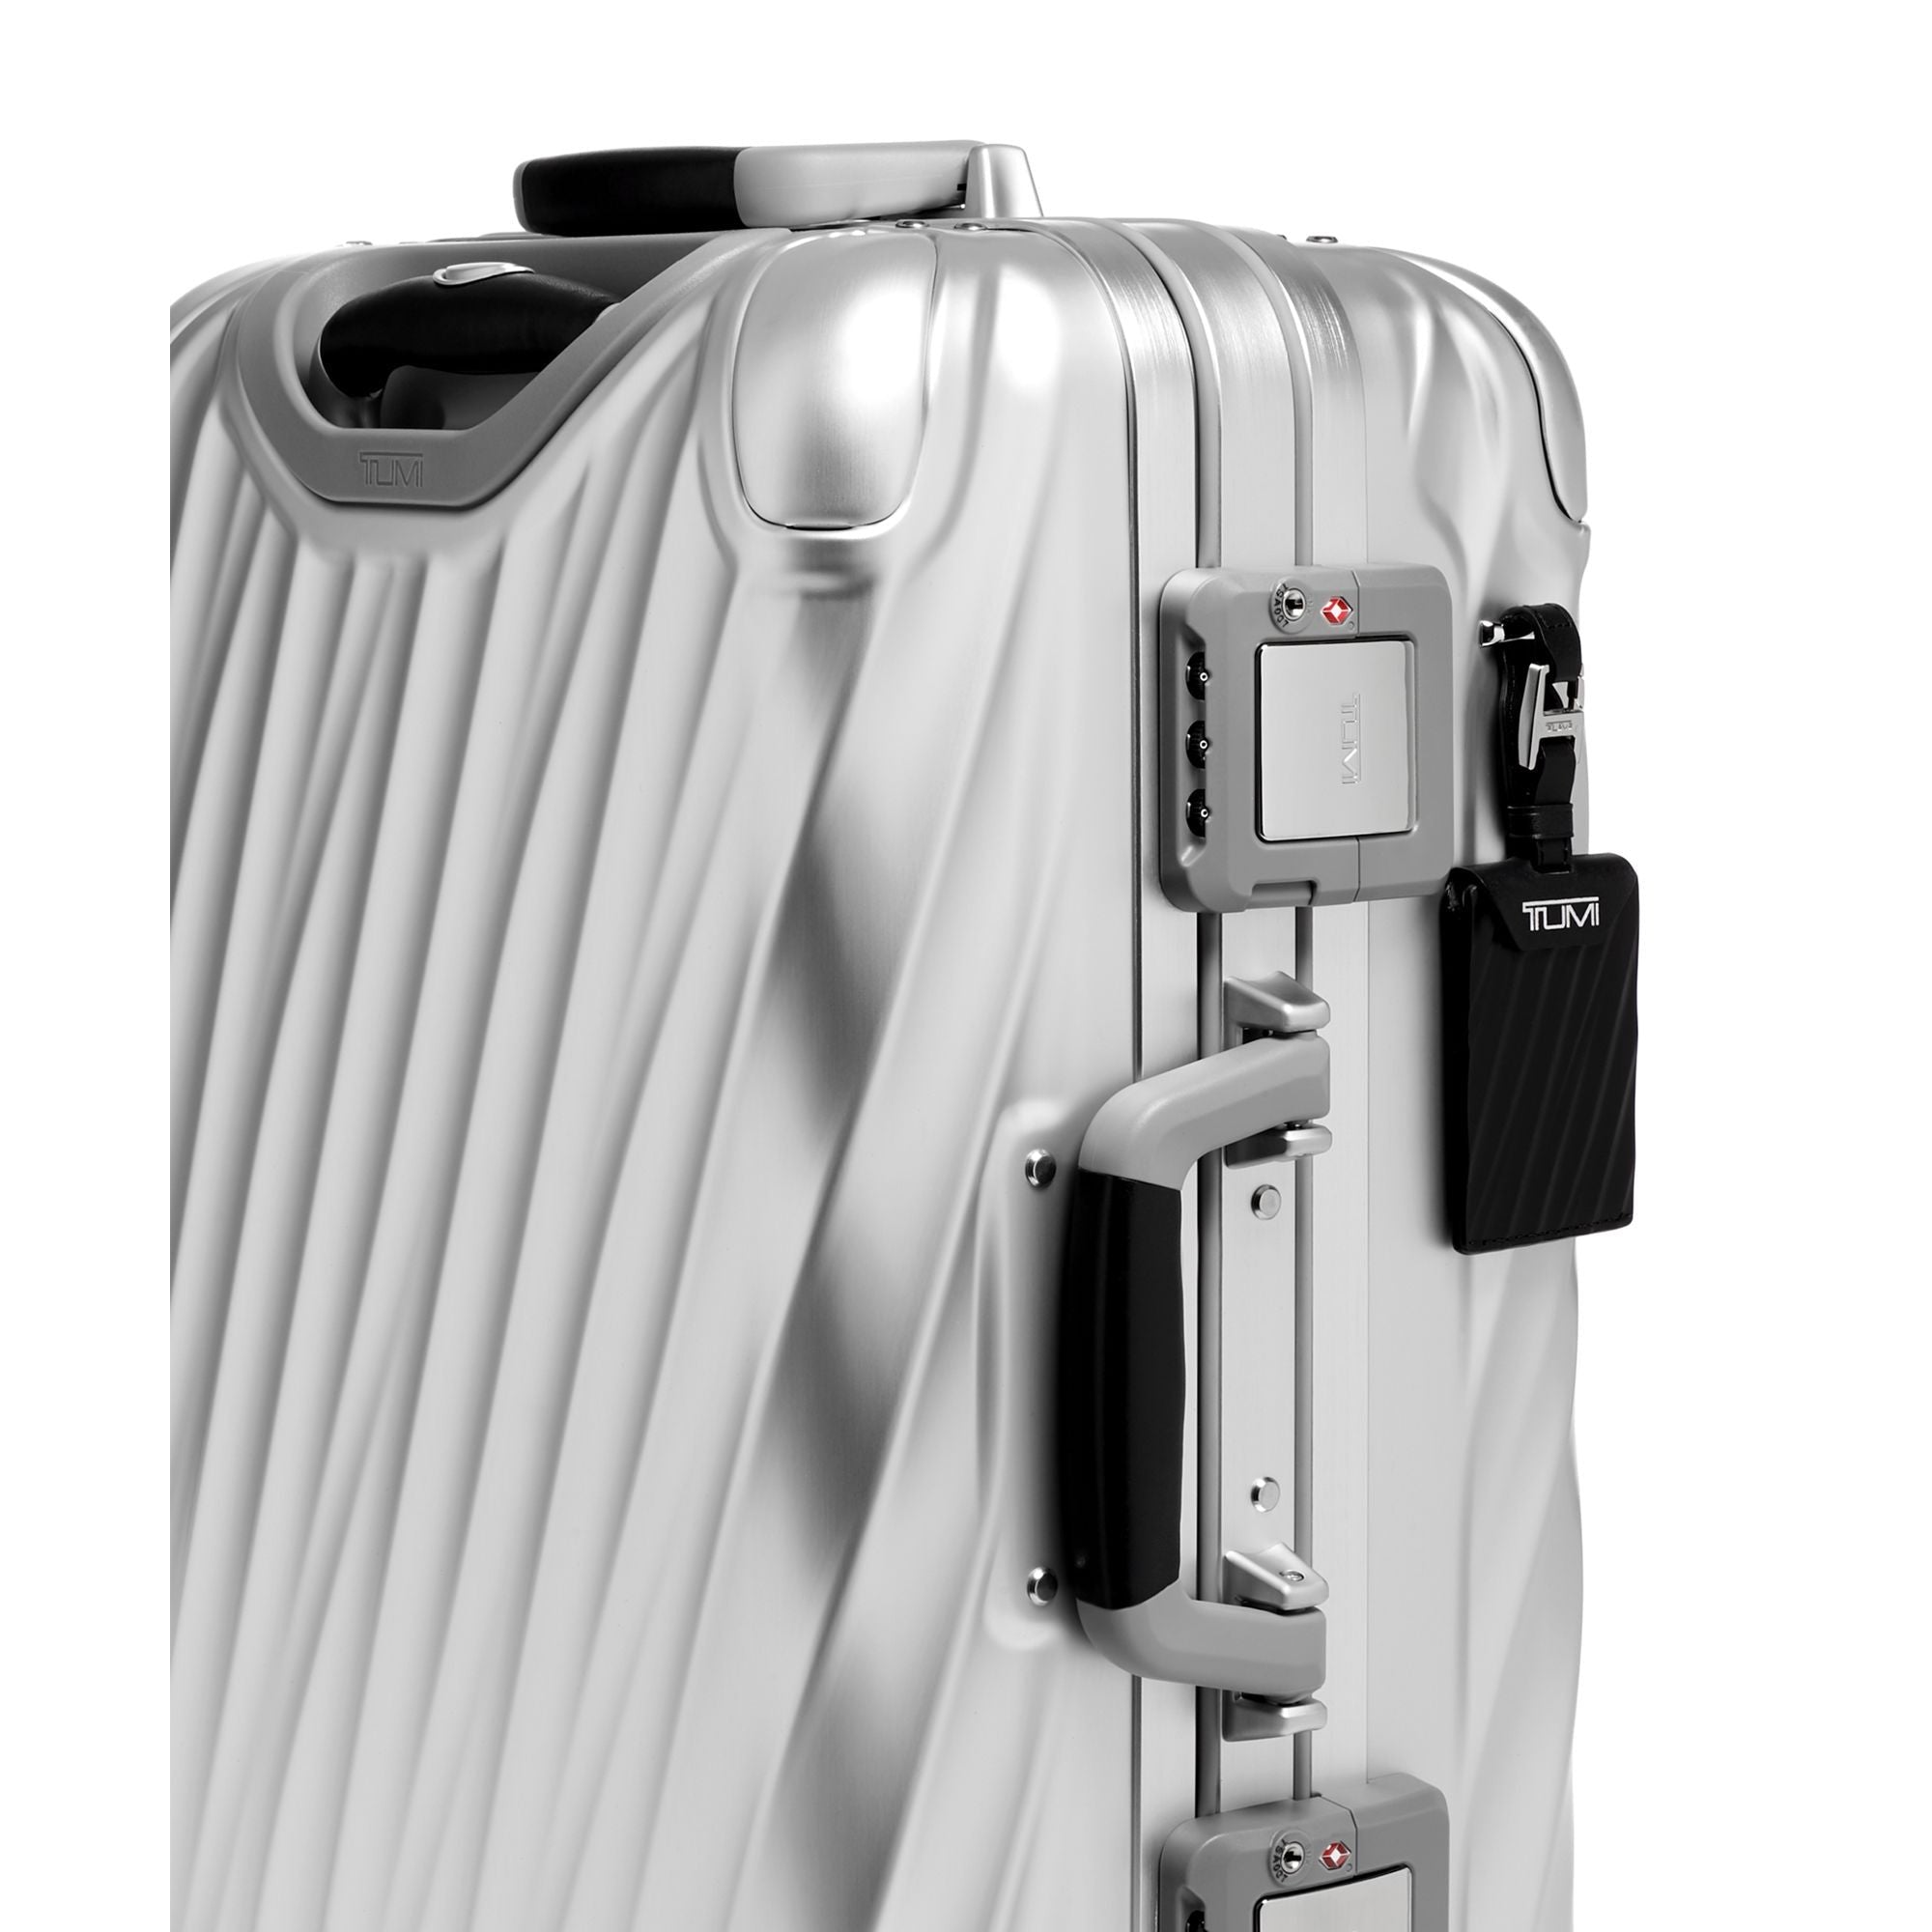 Tumi Hard Shell Continental Carry-on in Metallic for Men